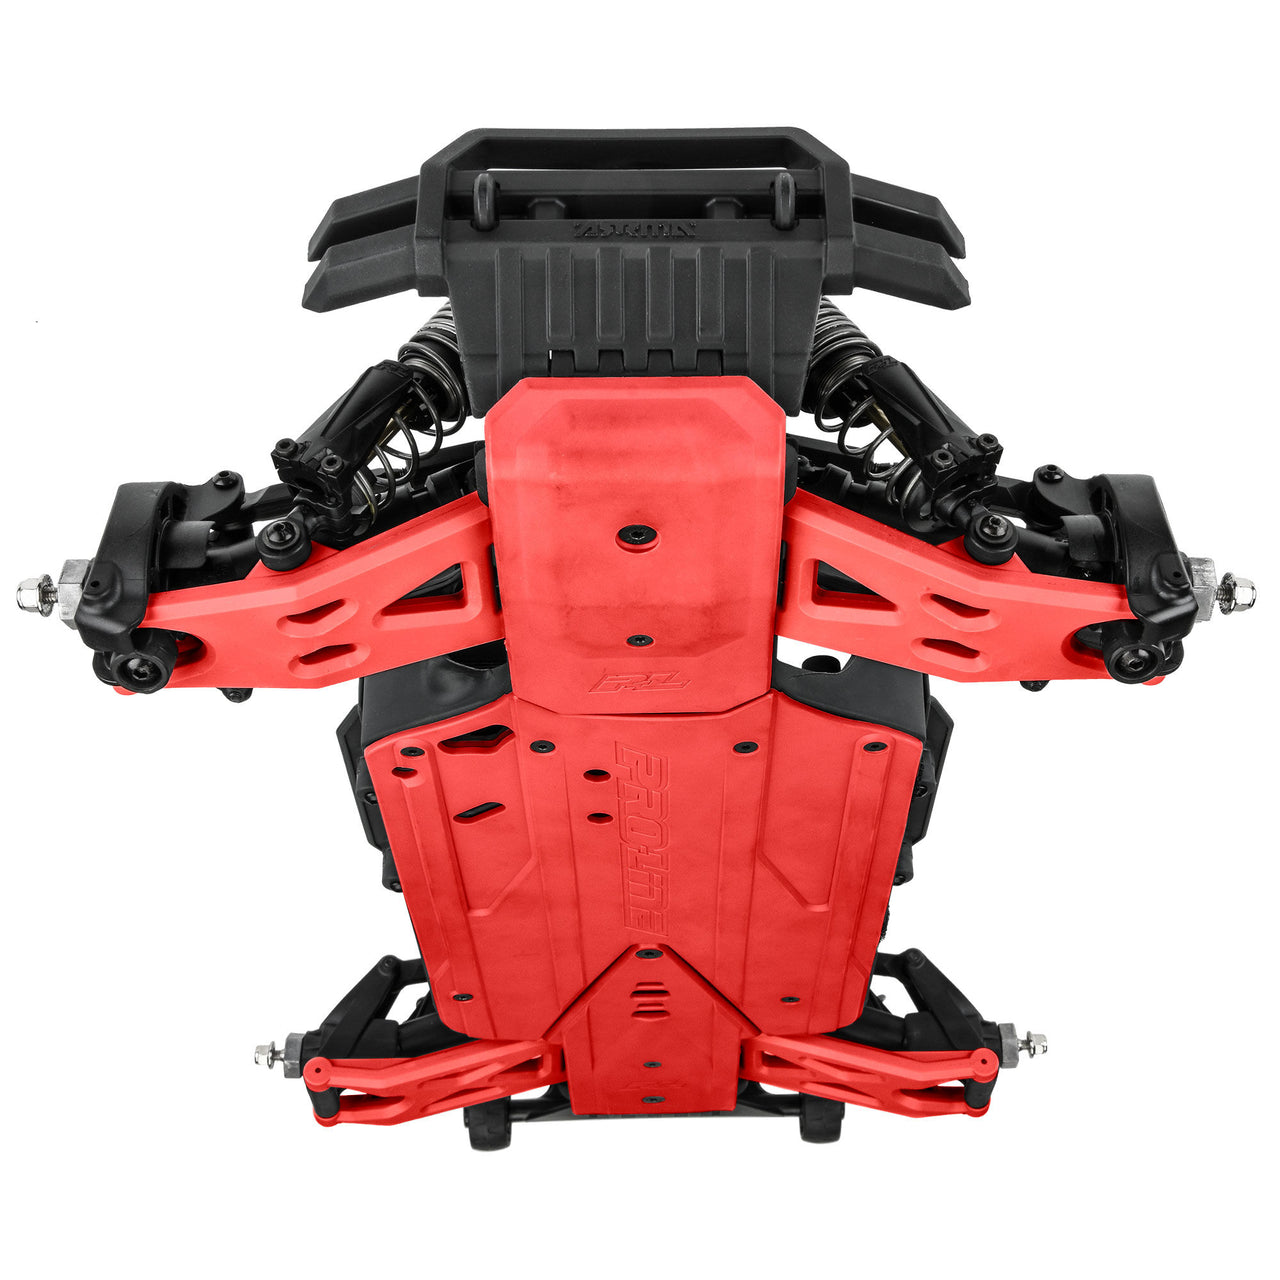 PRO640007 Bash Armor Rear Suspension Arms (Red) for ARRMA 3S Vehicles